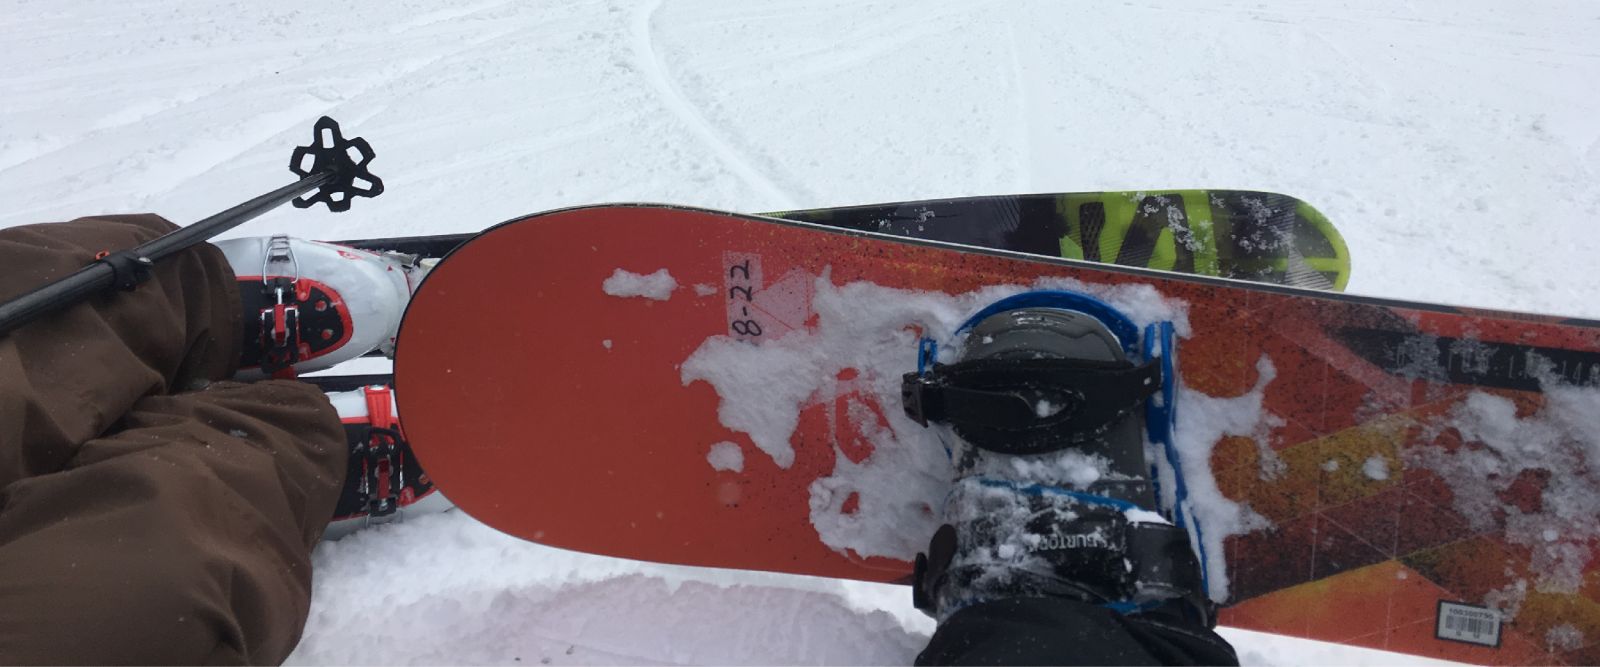 I caught up with a friend at the mountain. Pretty cool board&#44; at least it's doing the trick!